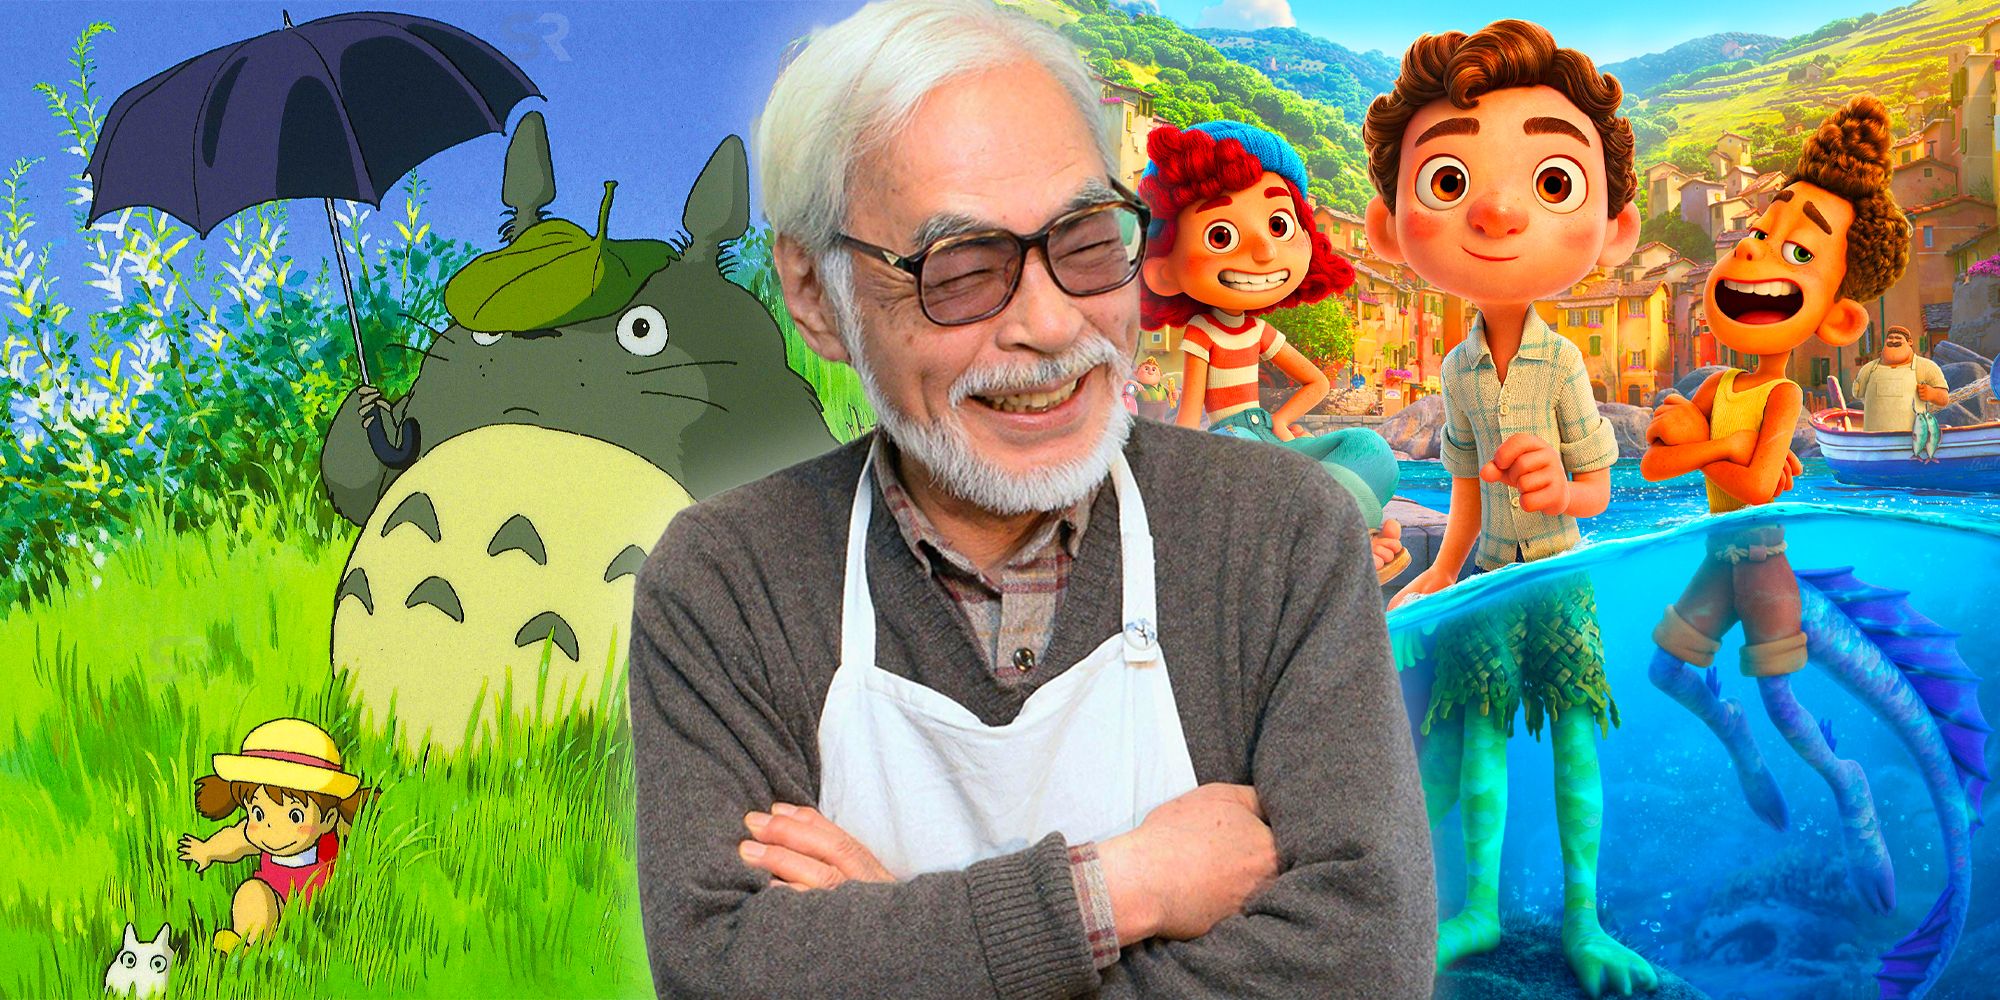 His movies are playful and so wonderful: How Hayao Miyazaki played a role  in inspiring Pixar's Luca